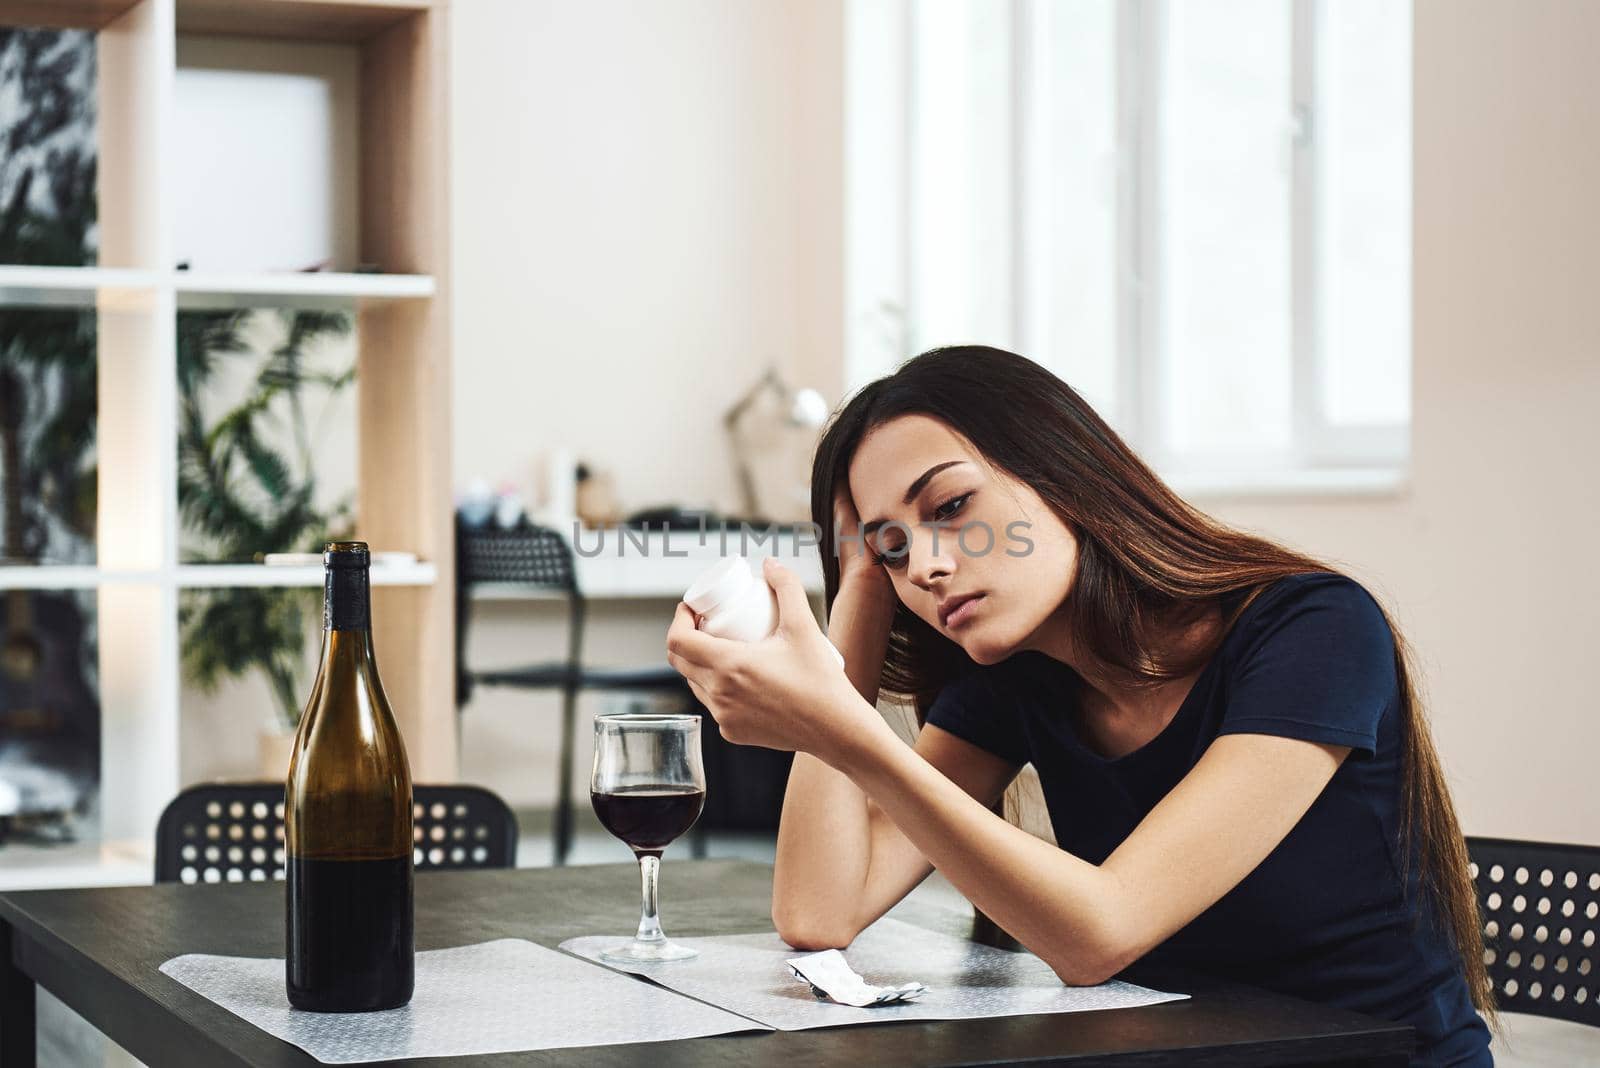 The unfortunate thing about this world is that good habits are so much easier to give up than bad ones. Addicted woman taking drugs with alcohol by friendsstock